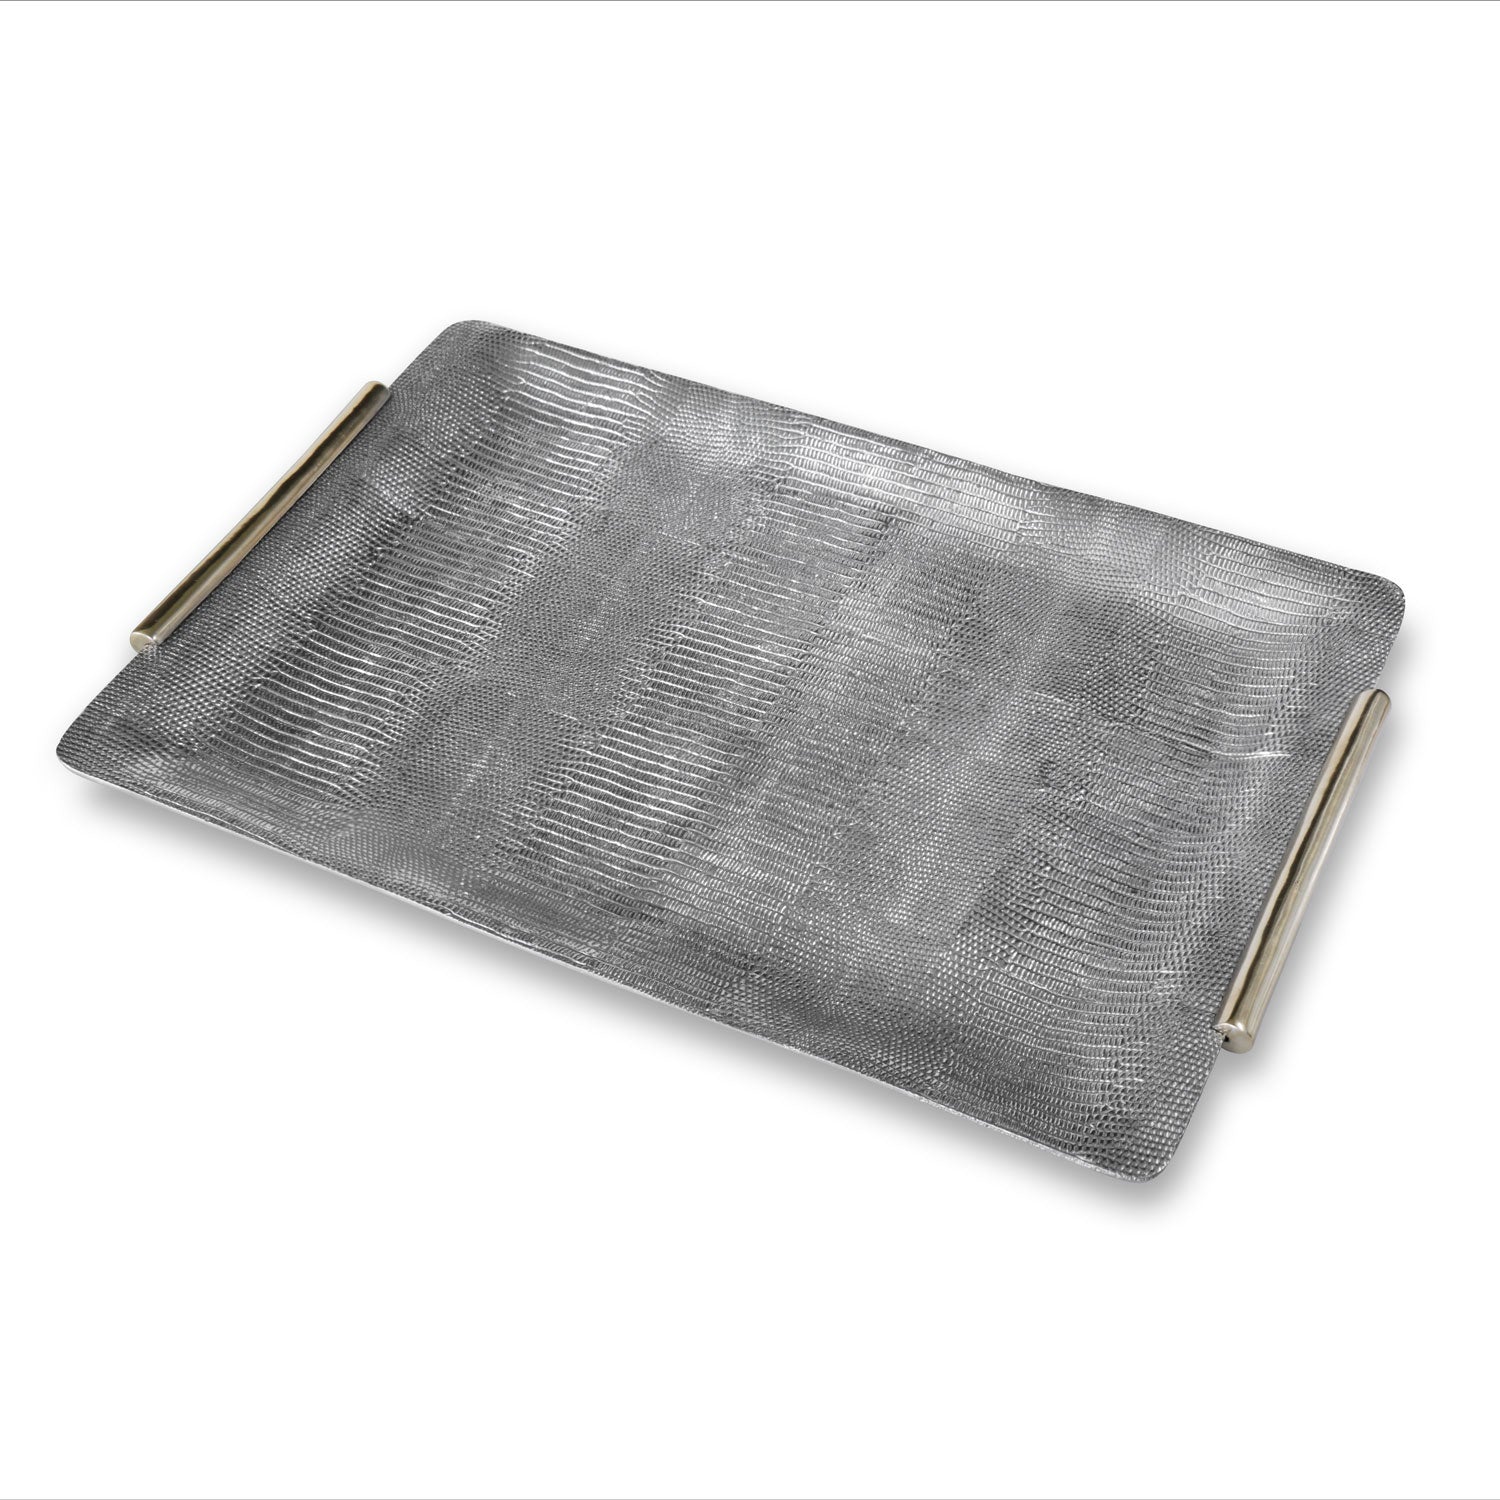 SIERRA MODERN Python Large Tray with Handles (Gunmetal and Gold)